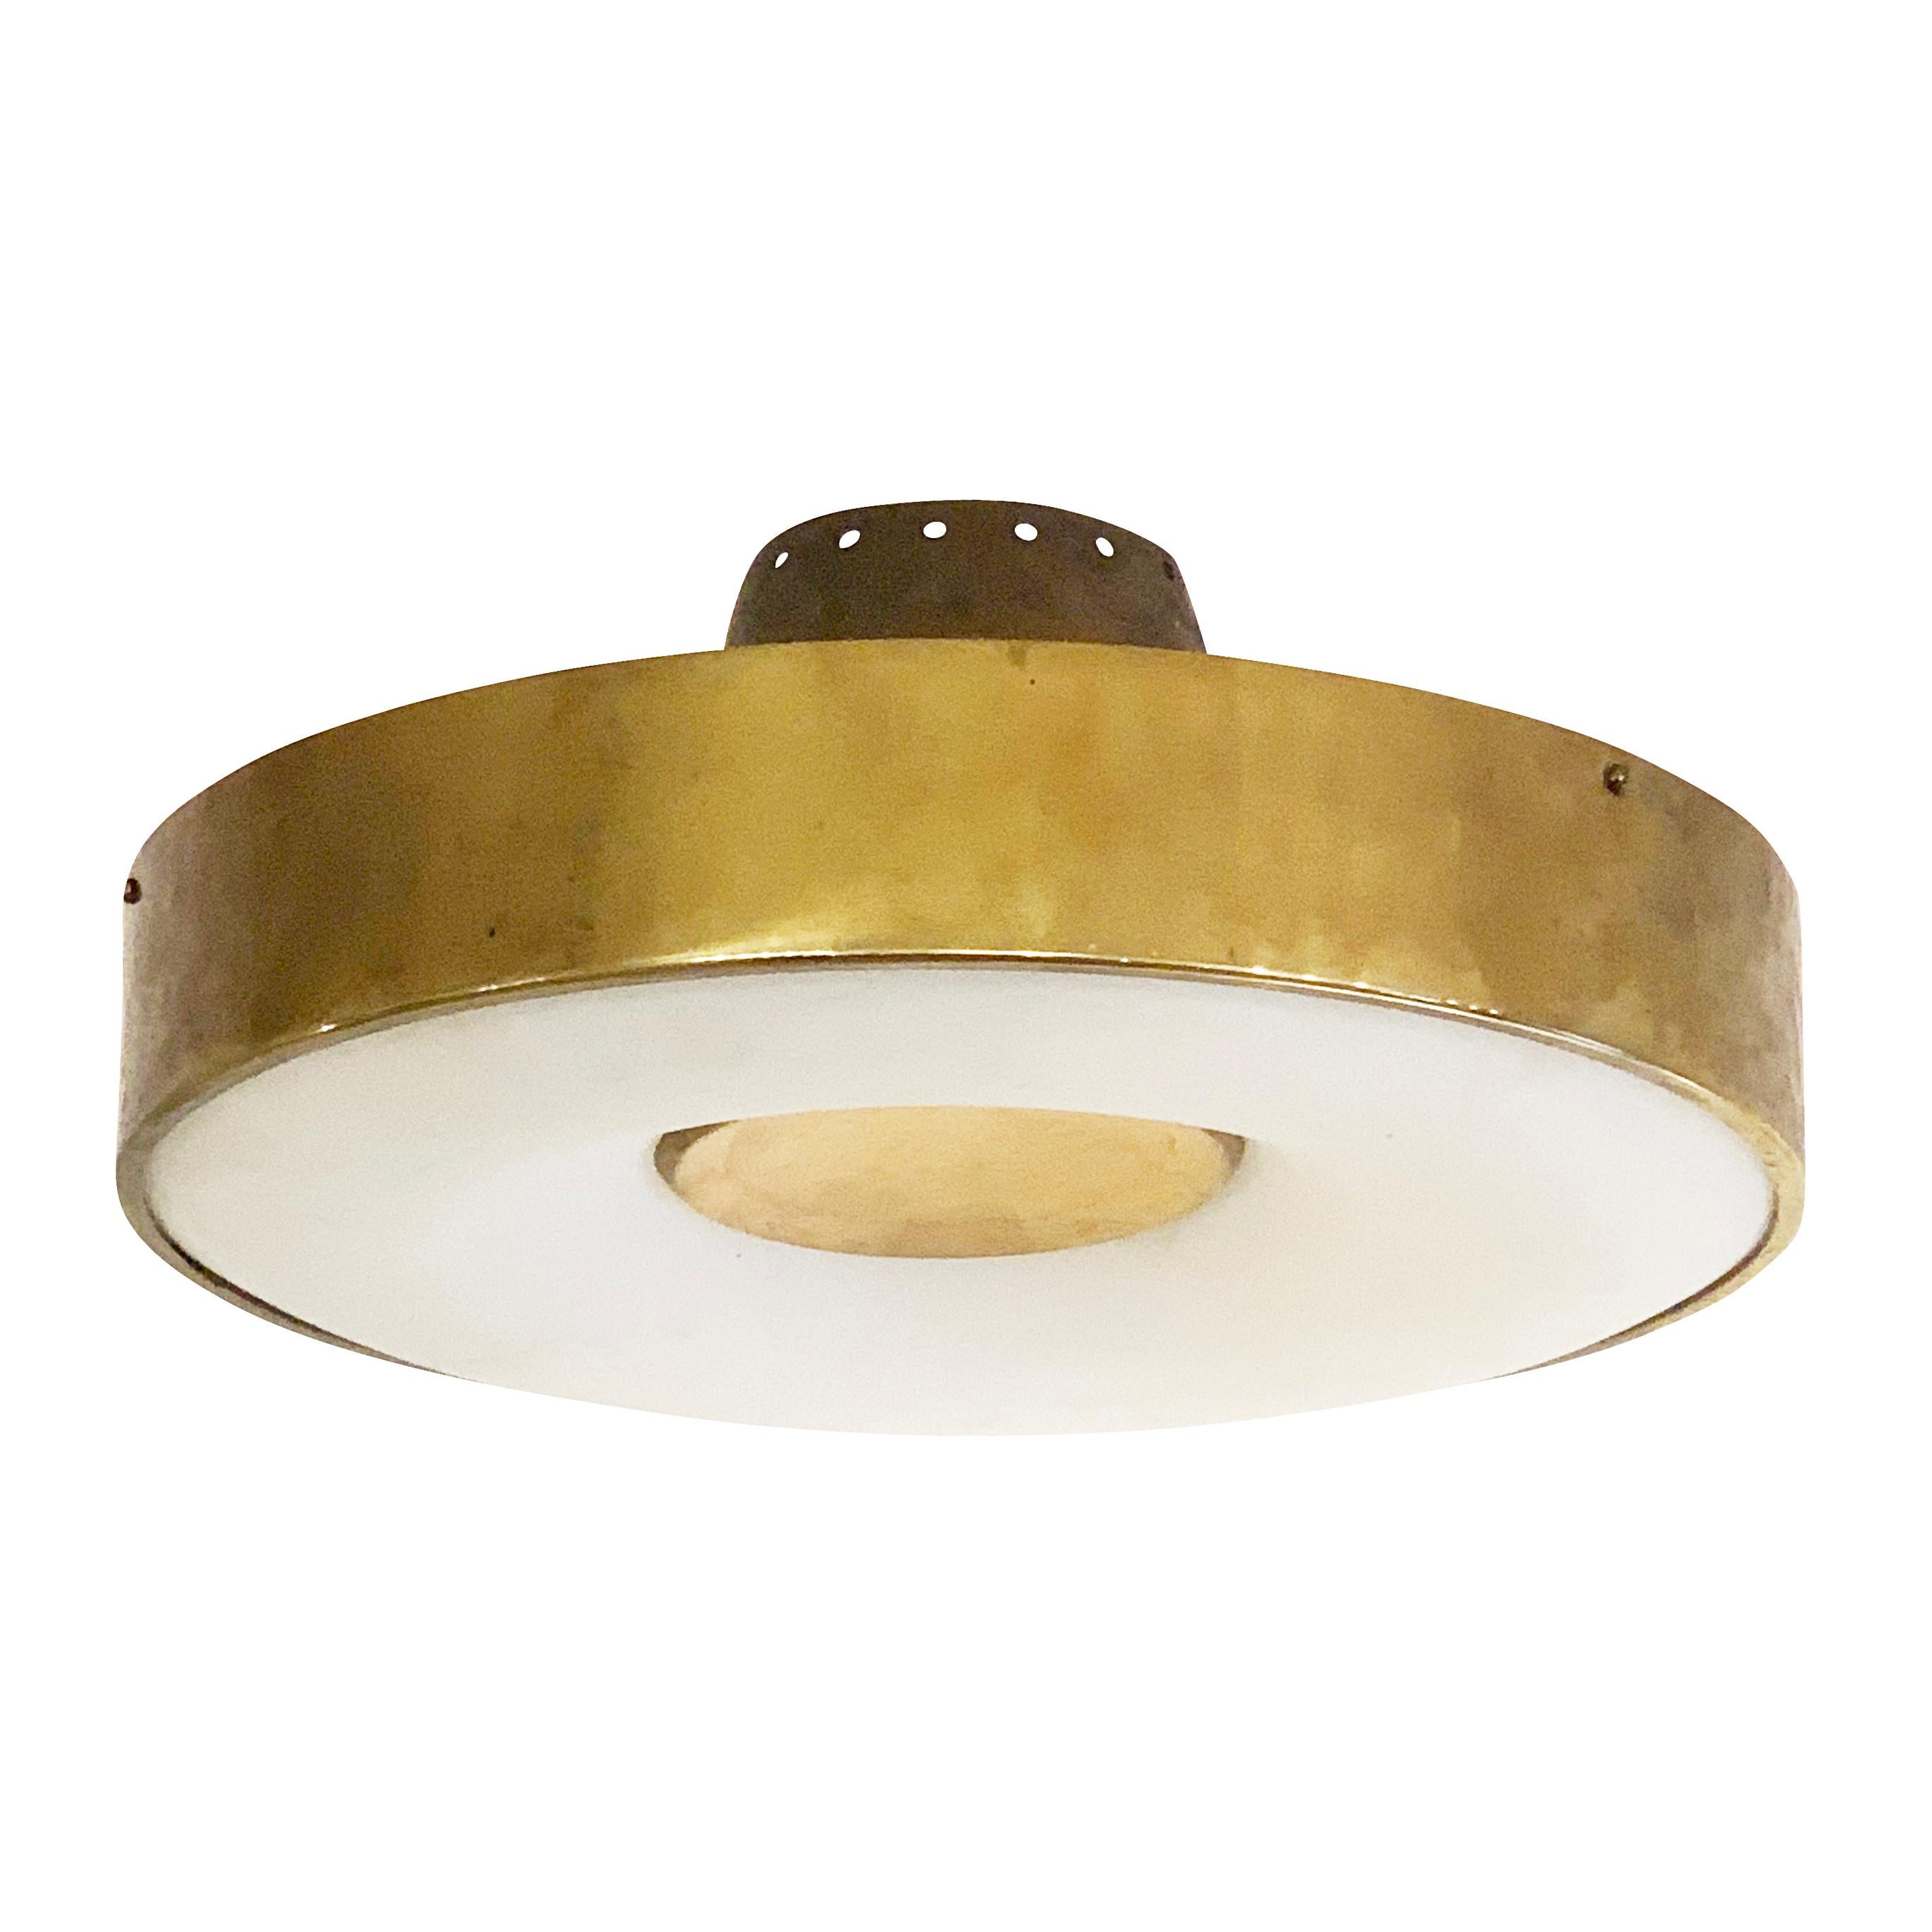 Fontana Arte ceiling light model 2134 designed by Max Ingrand in the 1960s. Features a polished brass band around a frosted glass diffuser. The center is lacquered off-white. Holds four candelabra sockets.

Condition: Good vintage condition, minor